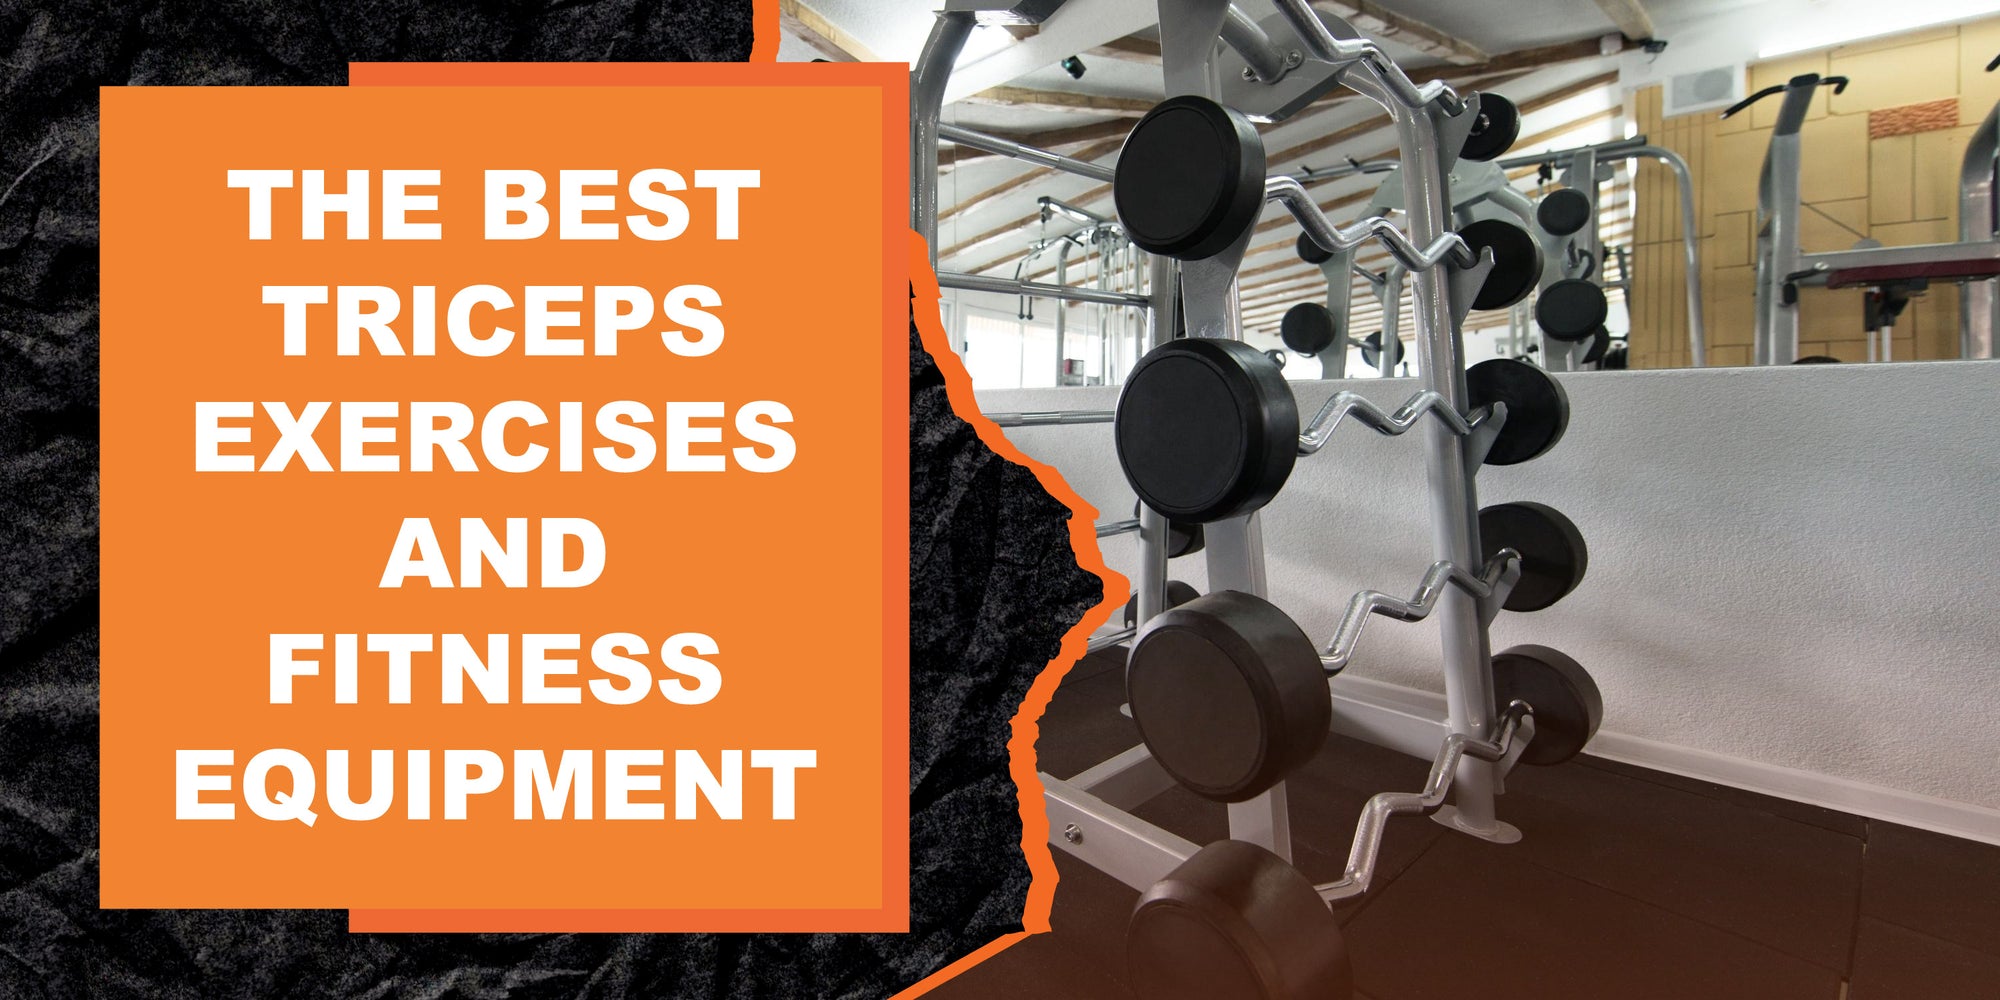 Working Out with the Best Triceps Exercises and Fitness Equipment